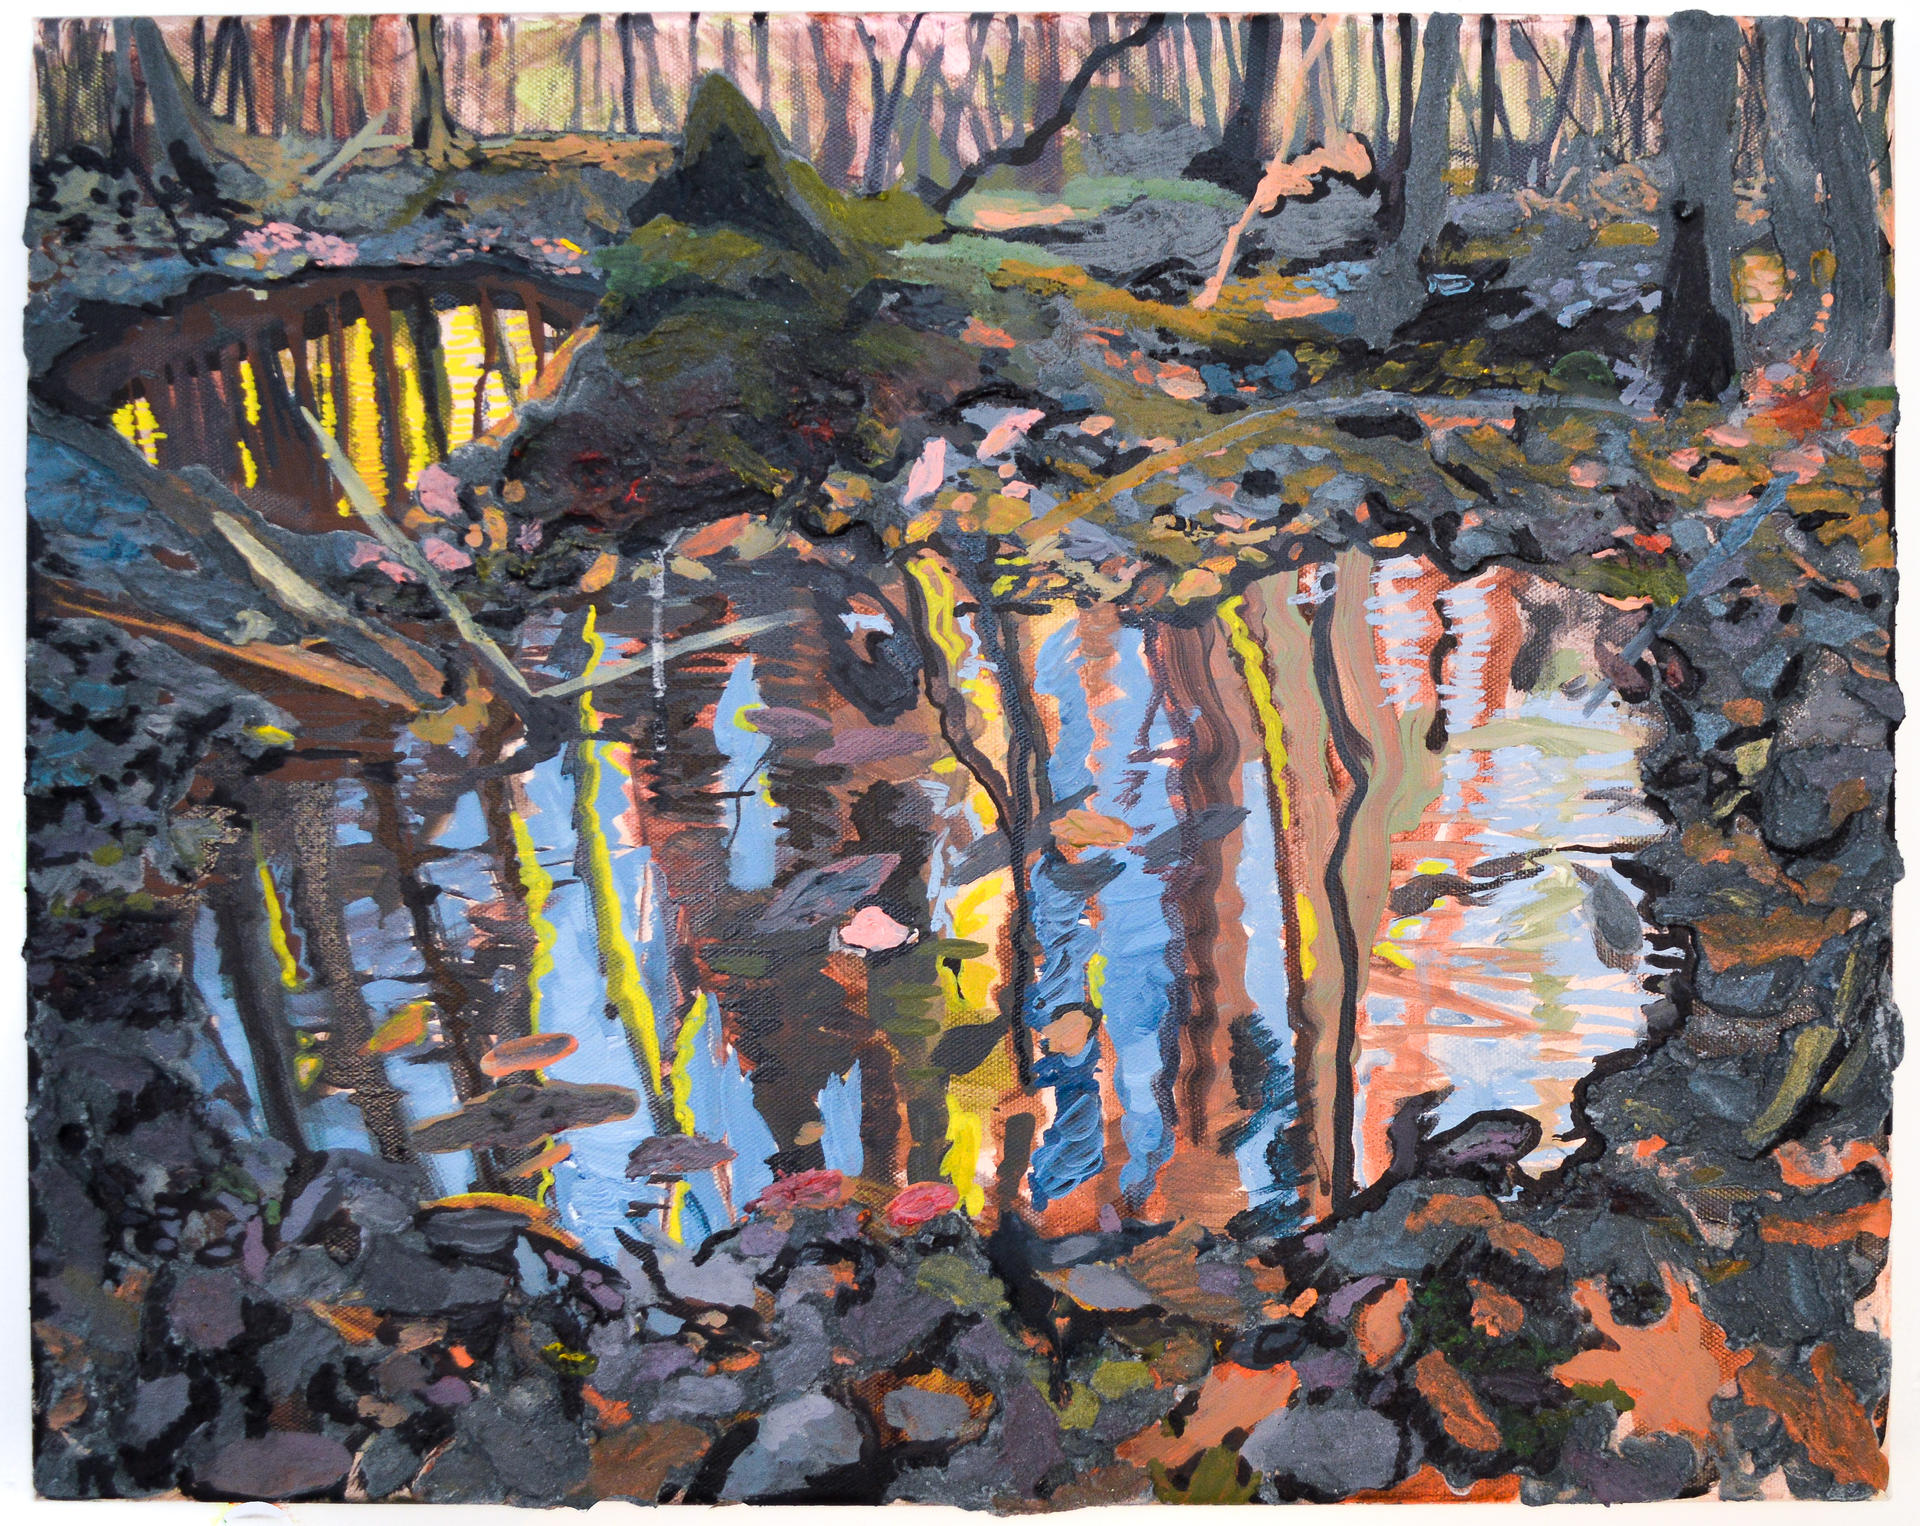 A painting of a puddle near a pond